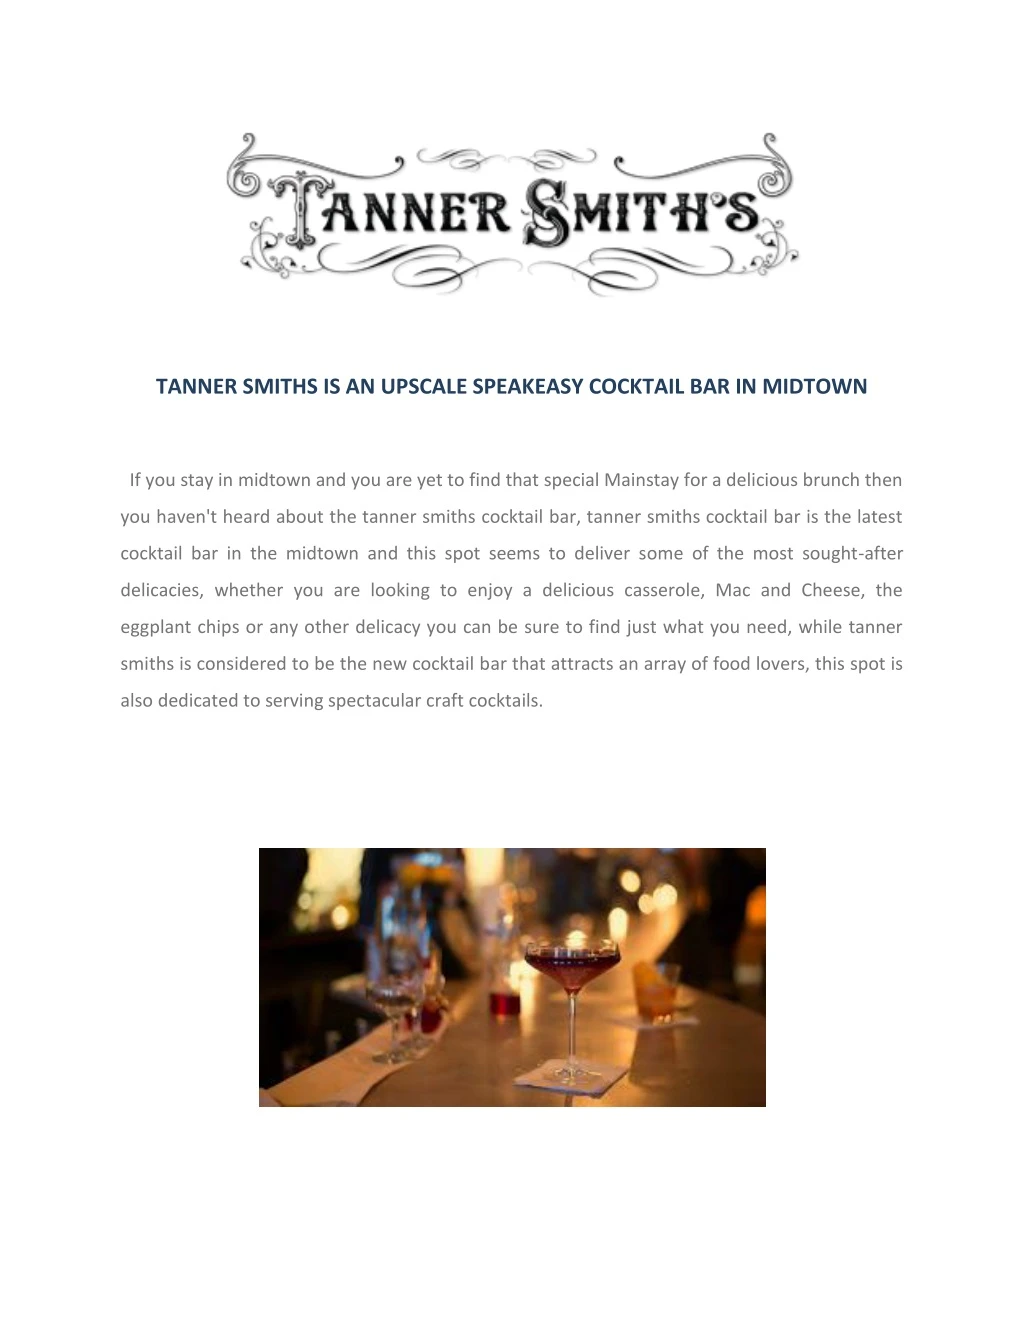 tanner smiths is an upscale speakeasy cocktail